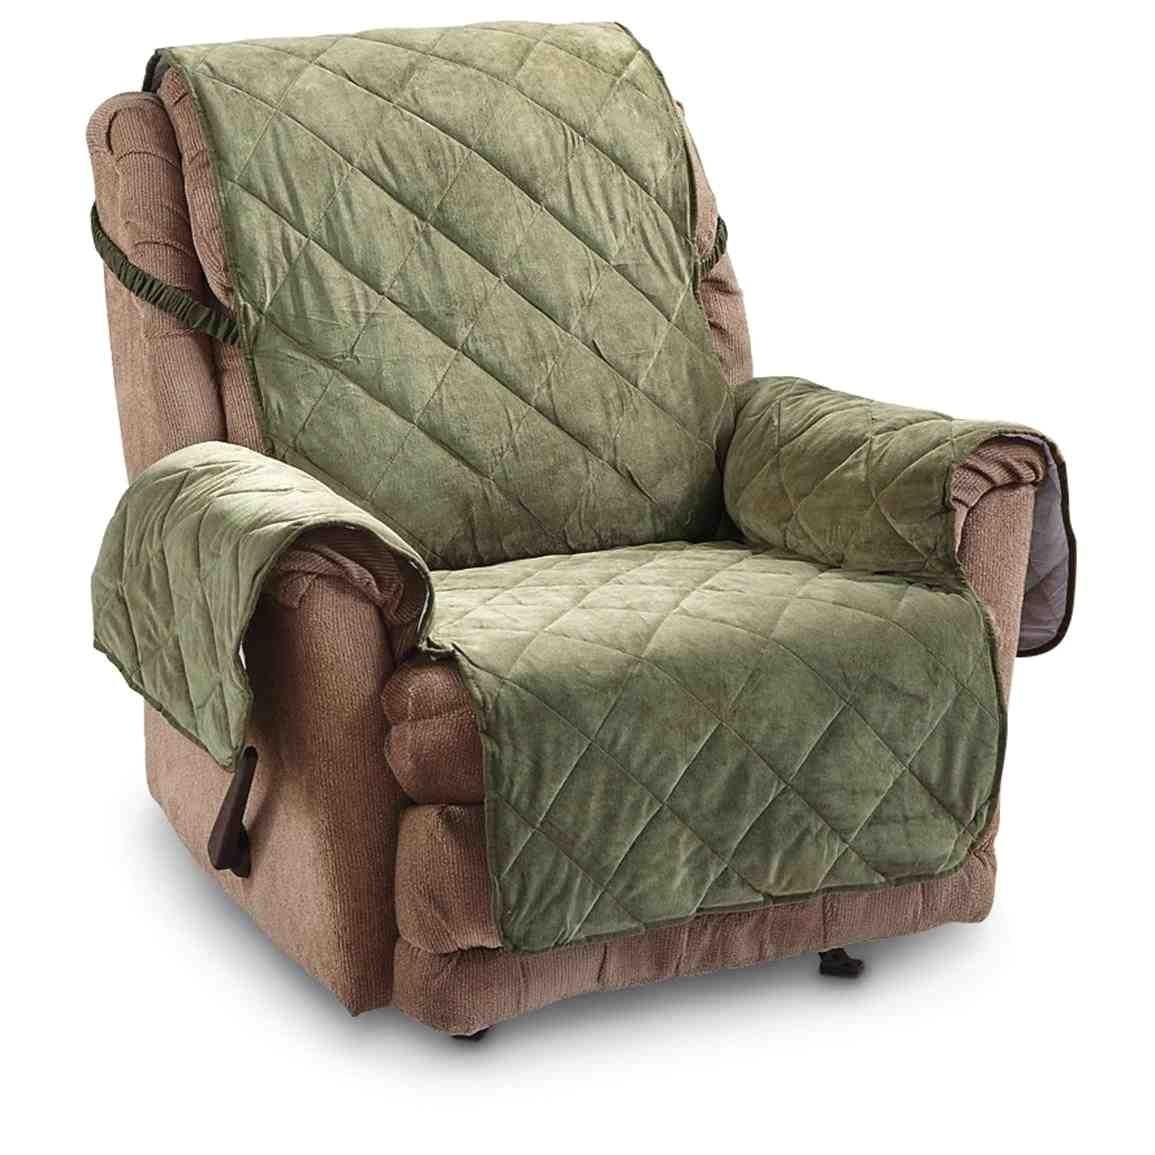 recliner covers make an old chair look new again home furniture design